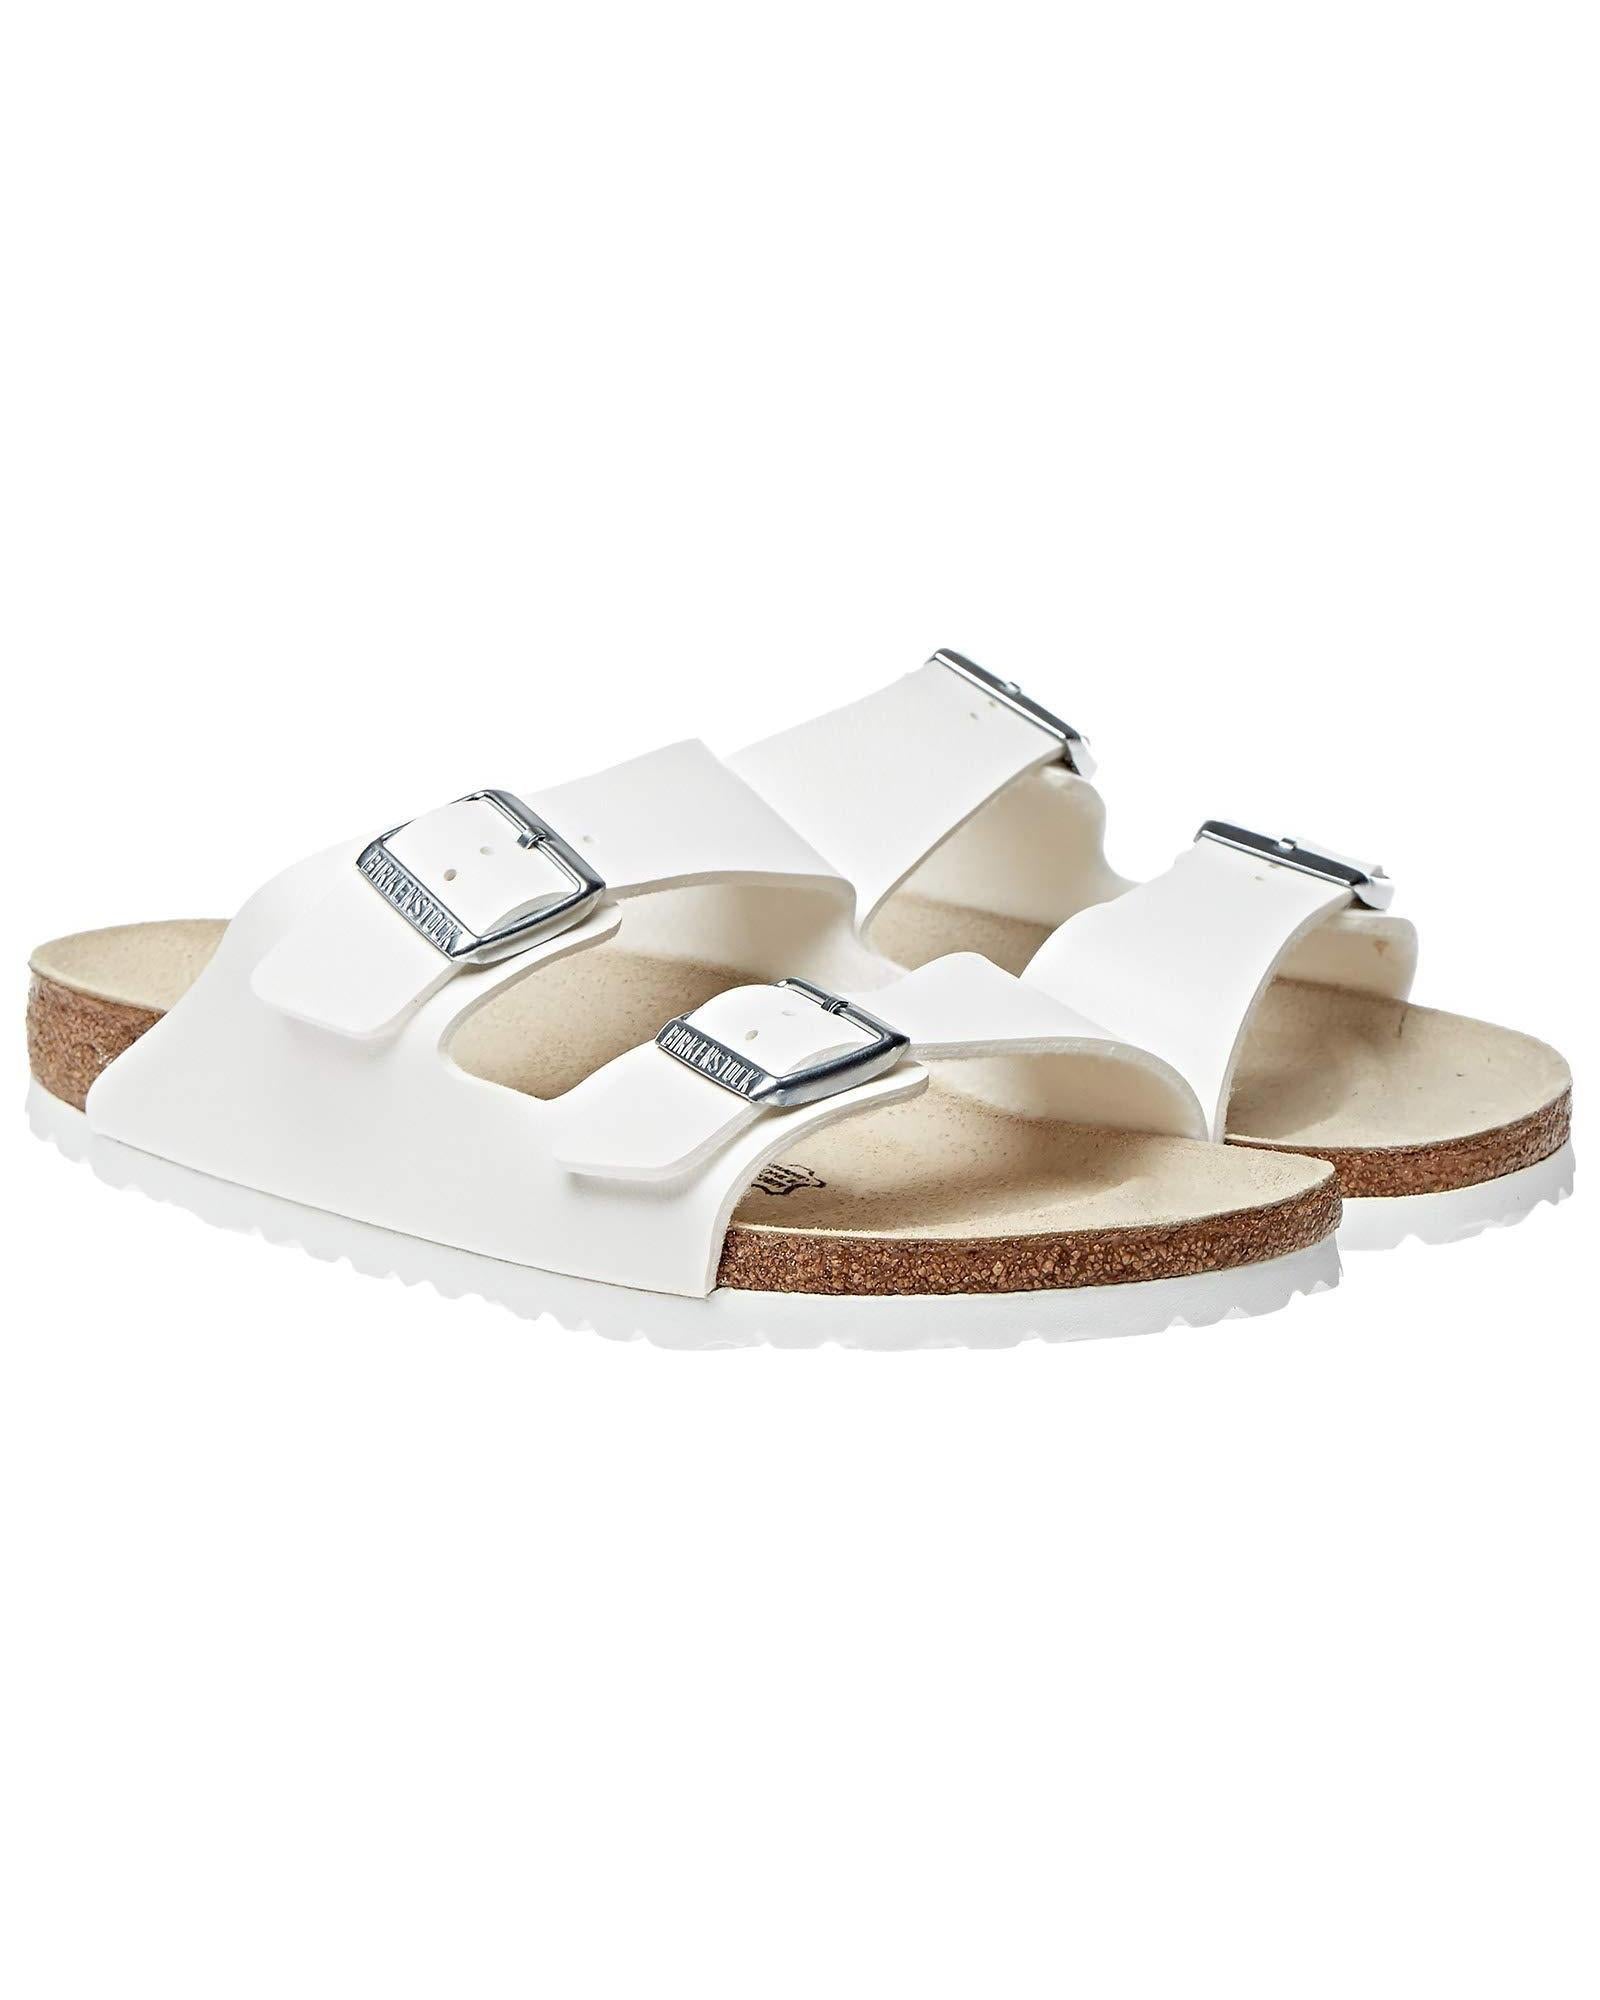 Handcrafted Leather Sandals with Arch Support - 41 EU